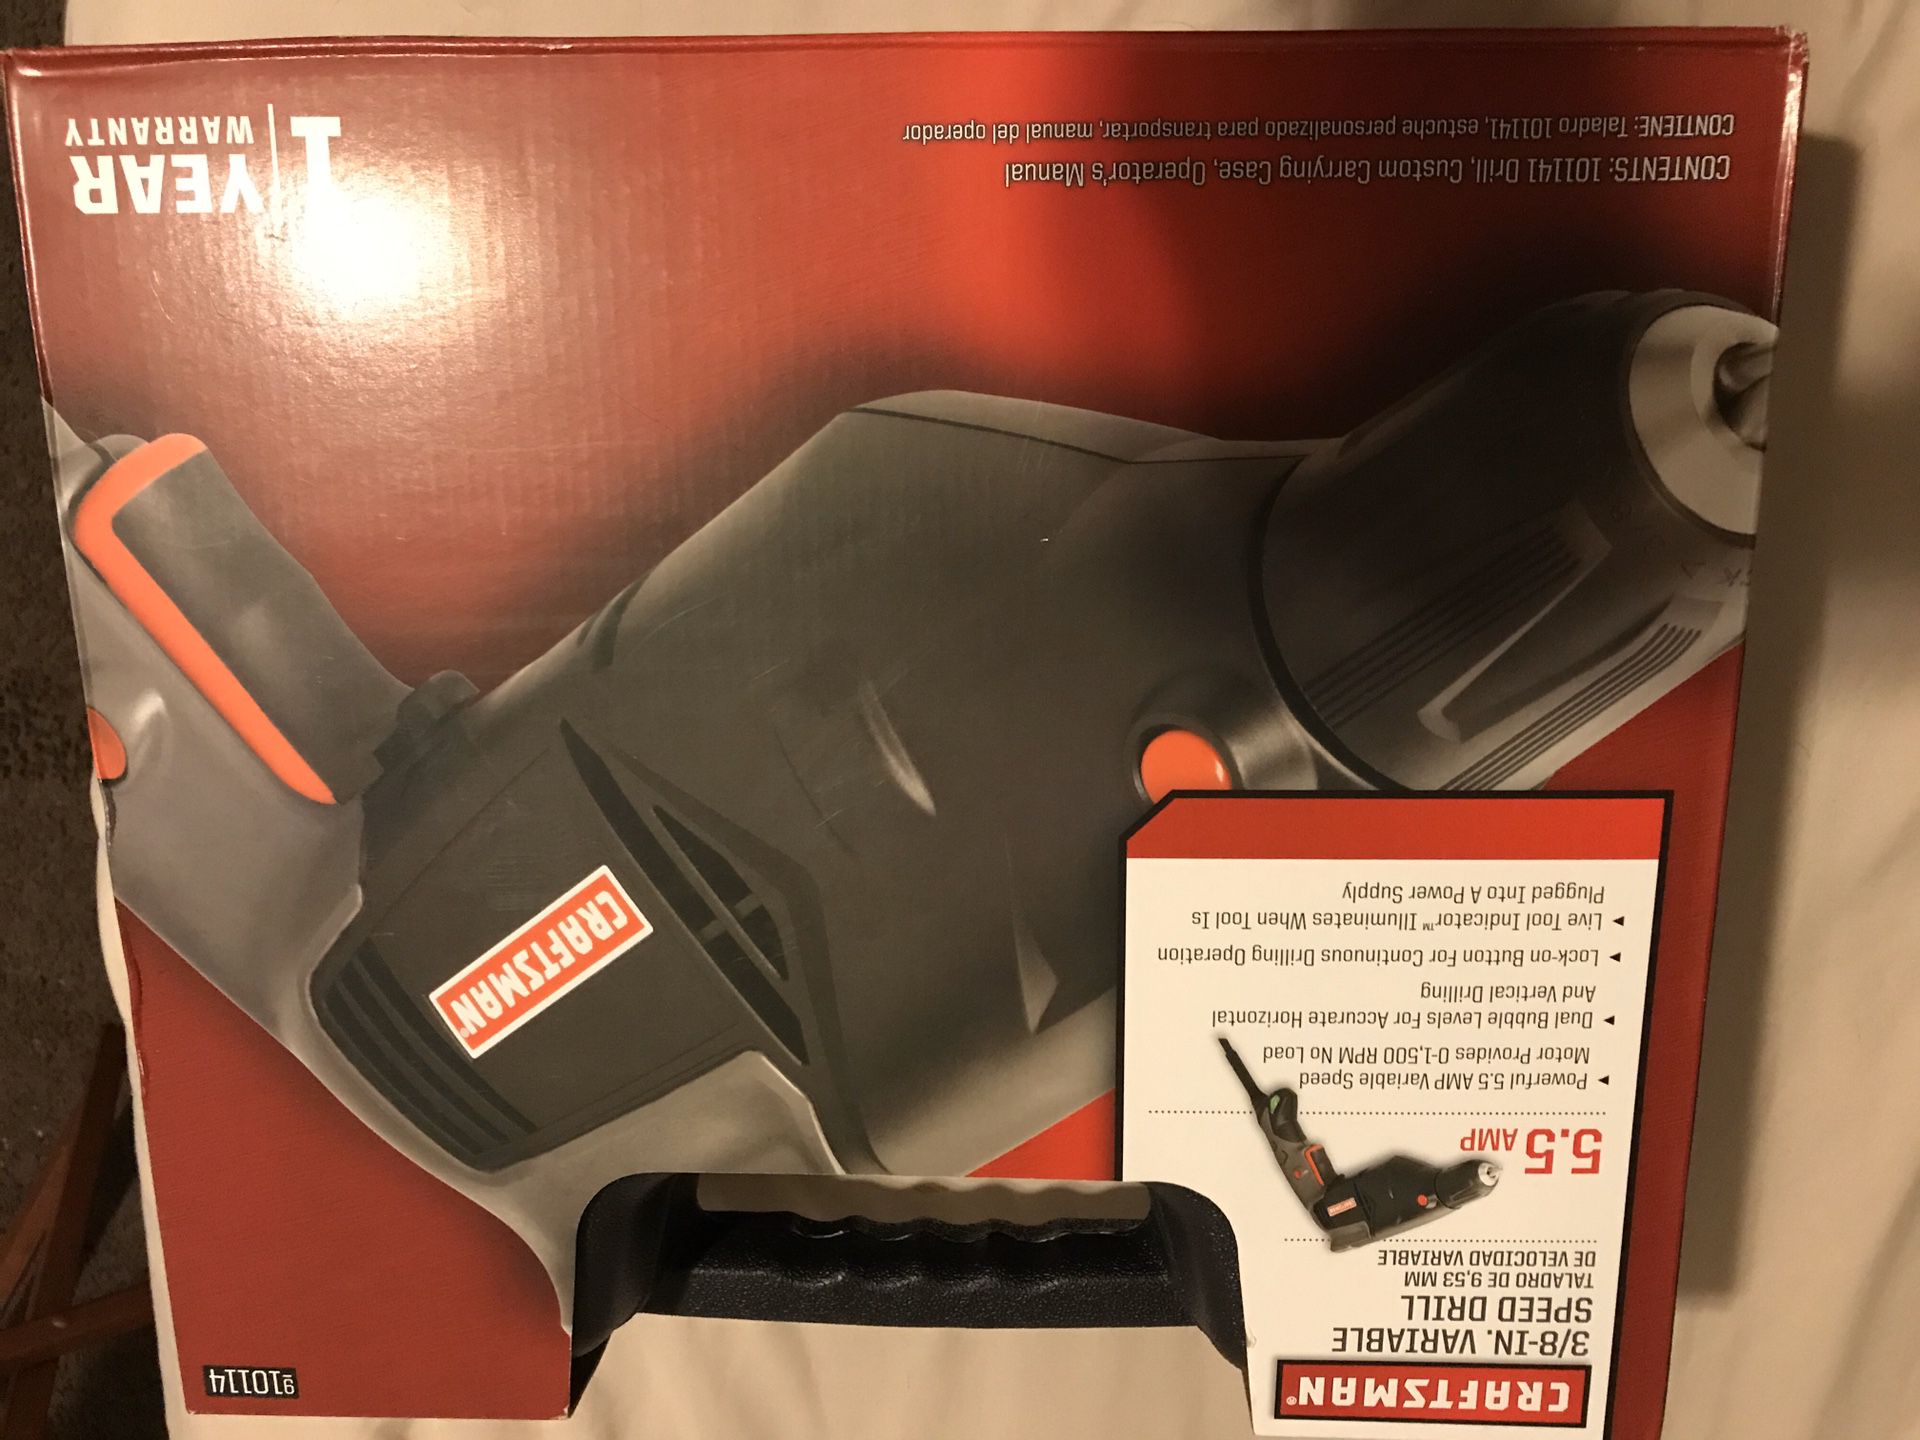 Craftsman 3/8-in variable speed drill 5.5 amp